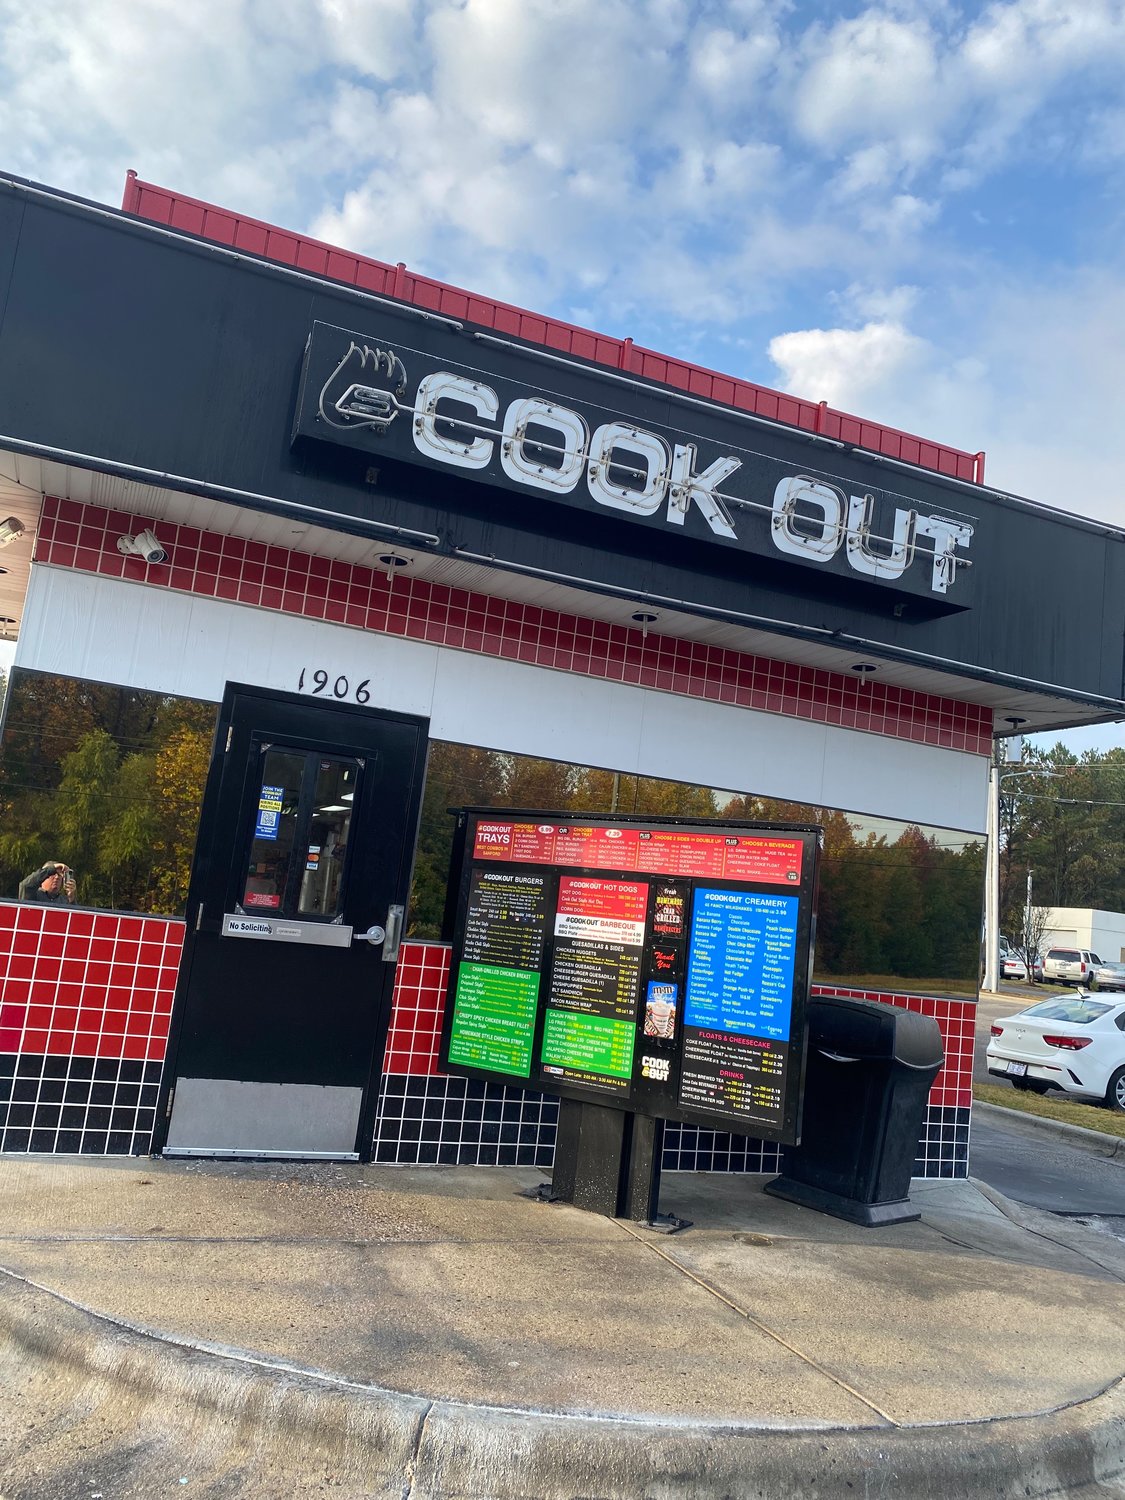 Sanford's Cook Out location has been a popular stop for burgers and shakes for years. Siler City's Cook Out is anticipated to open next summer.